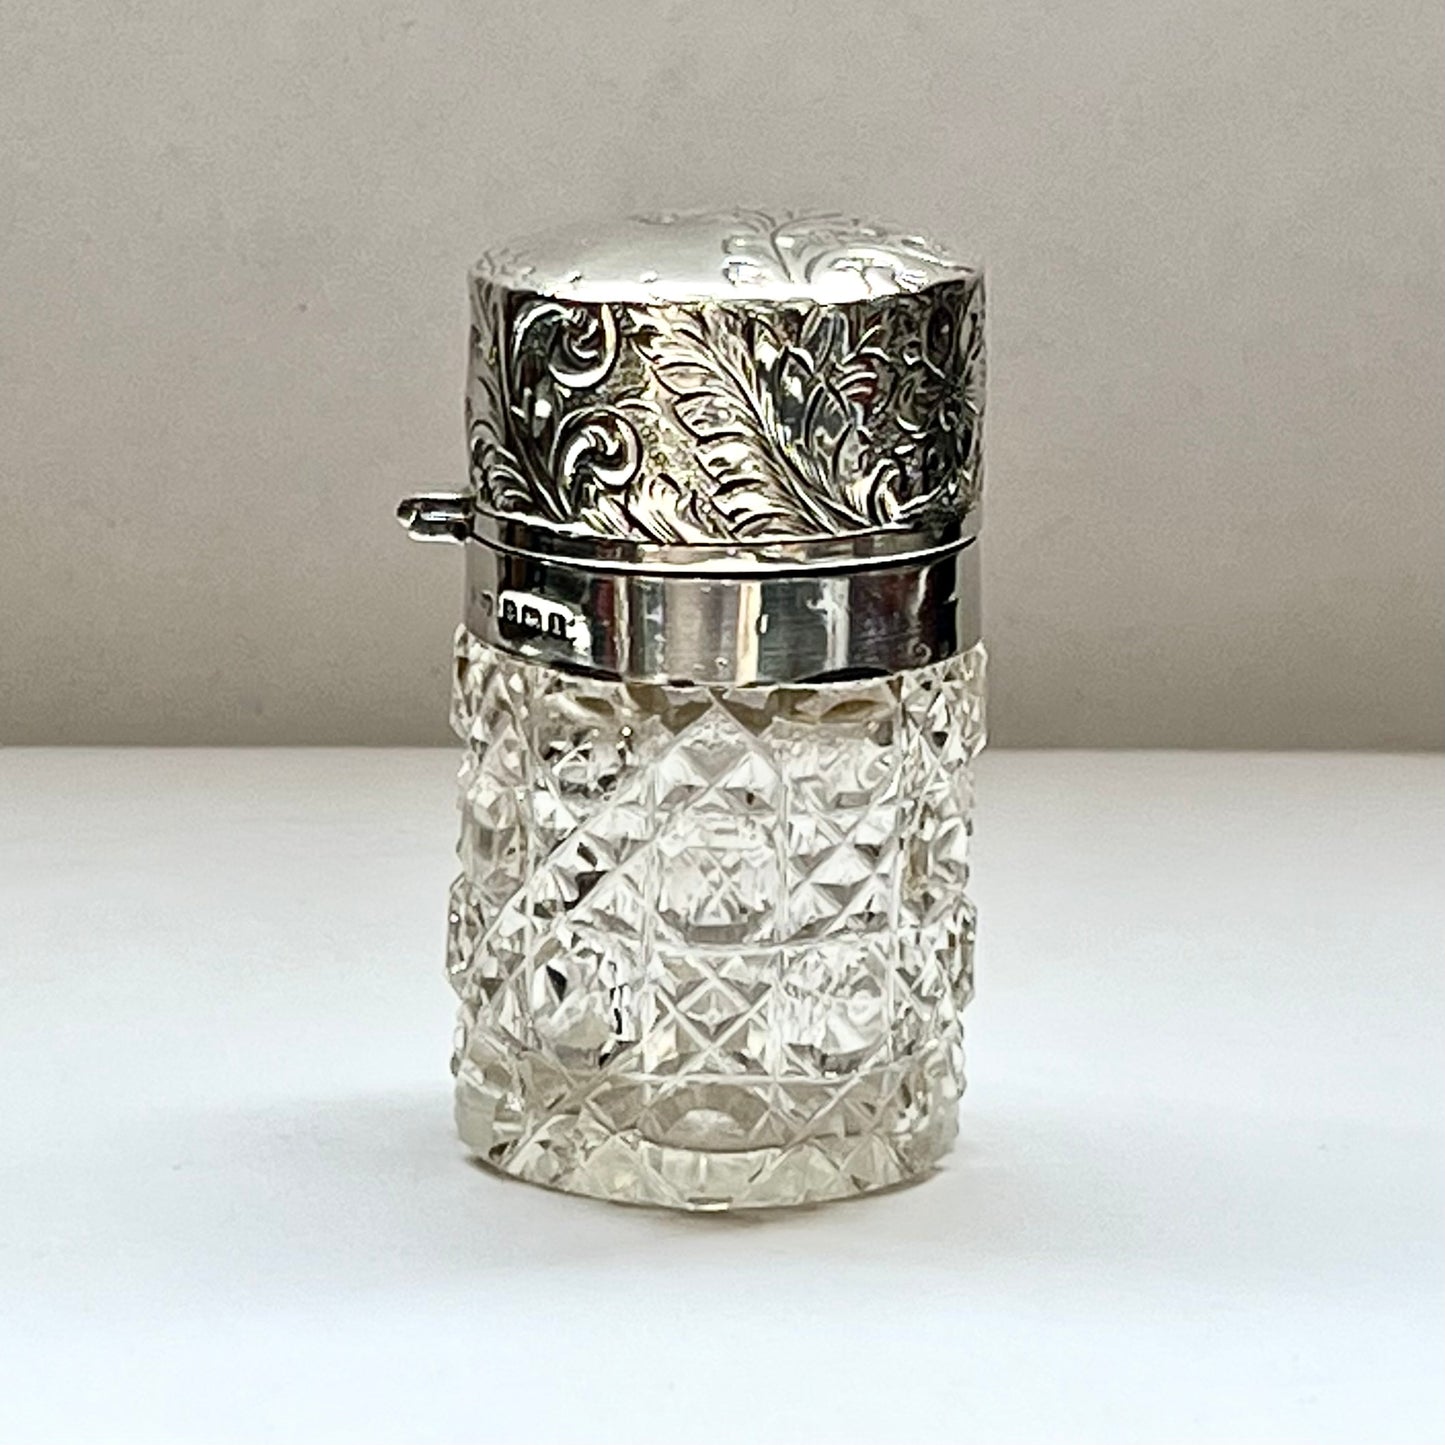 Antique Edwardian cut glass and sterling silver scent bottle, London 1910